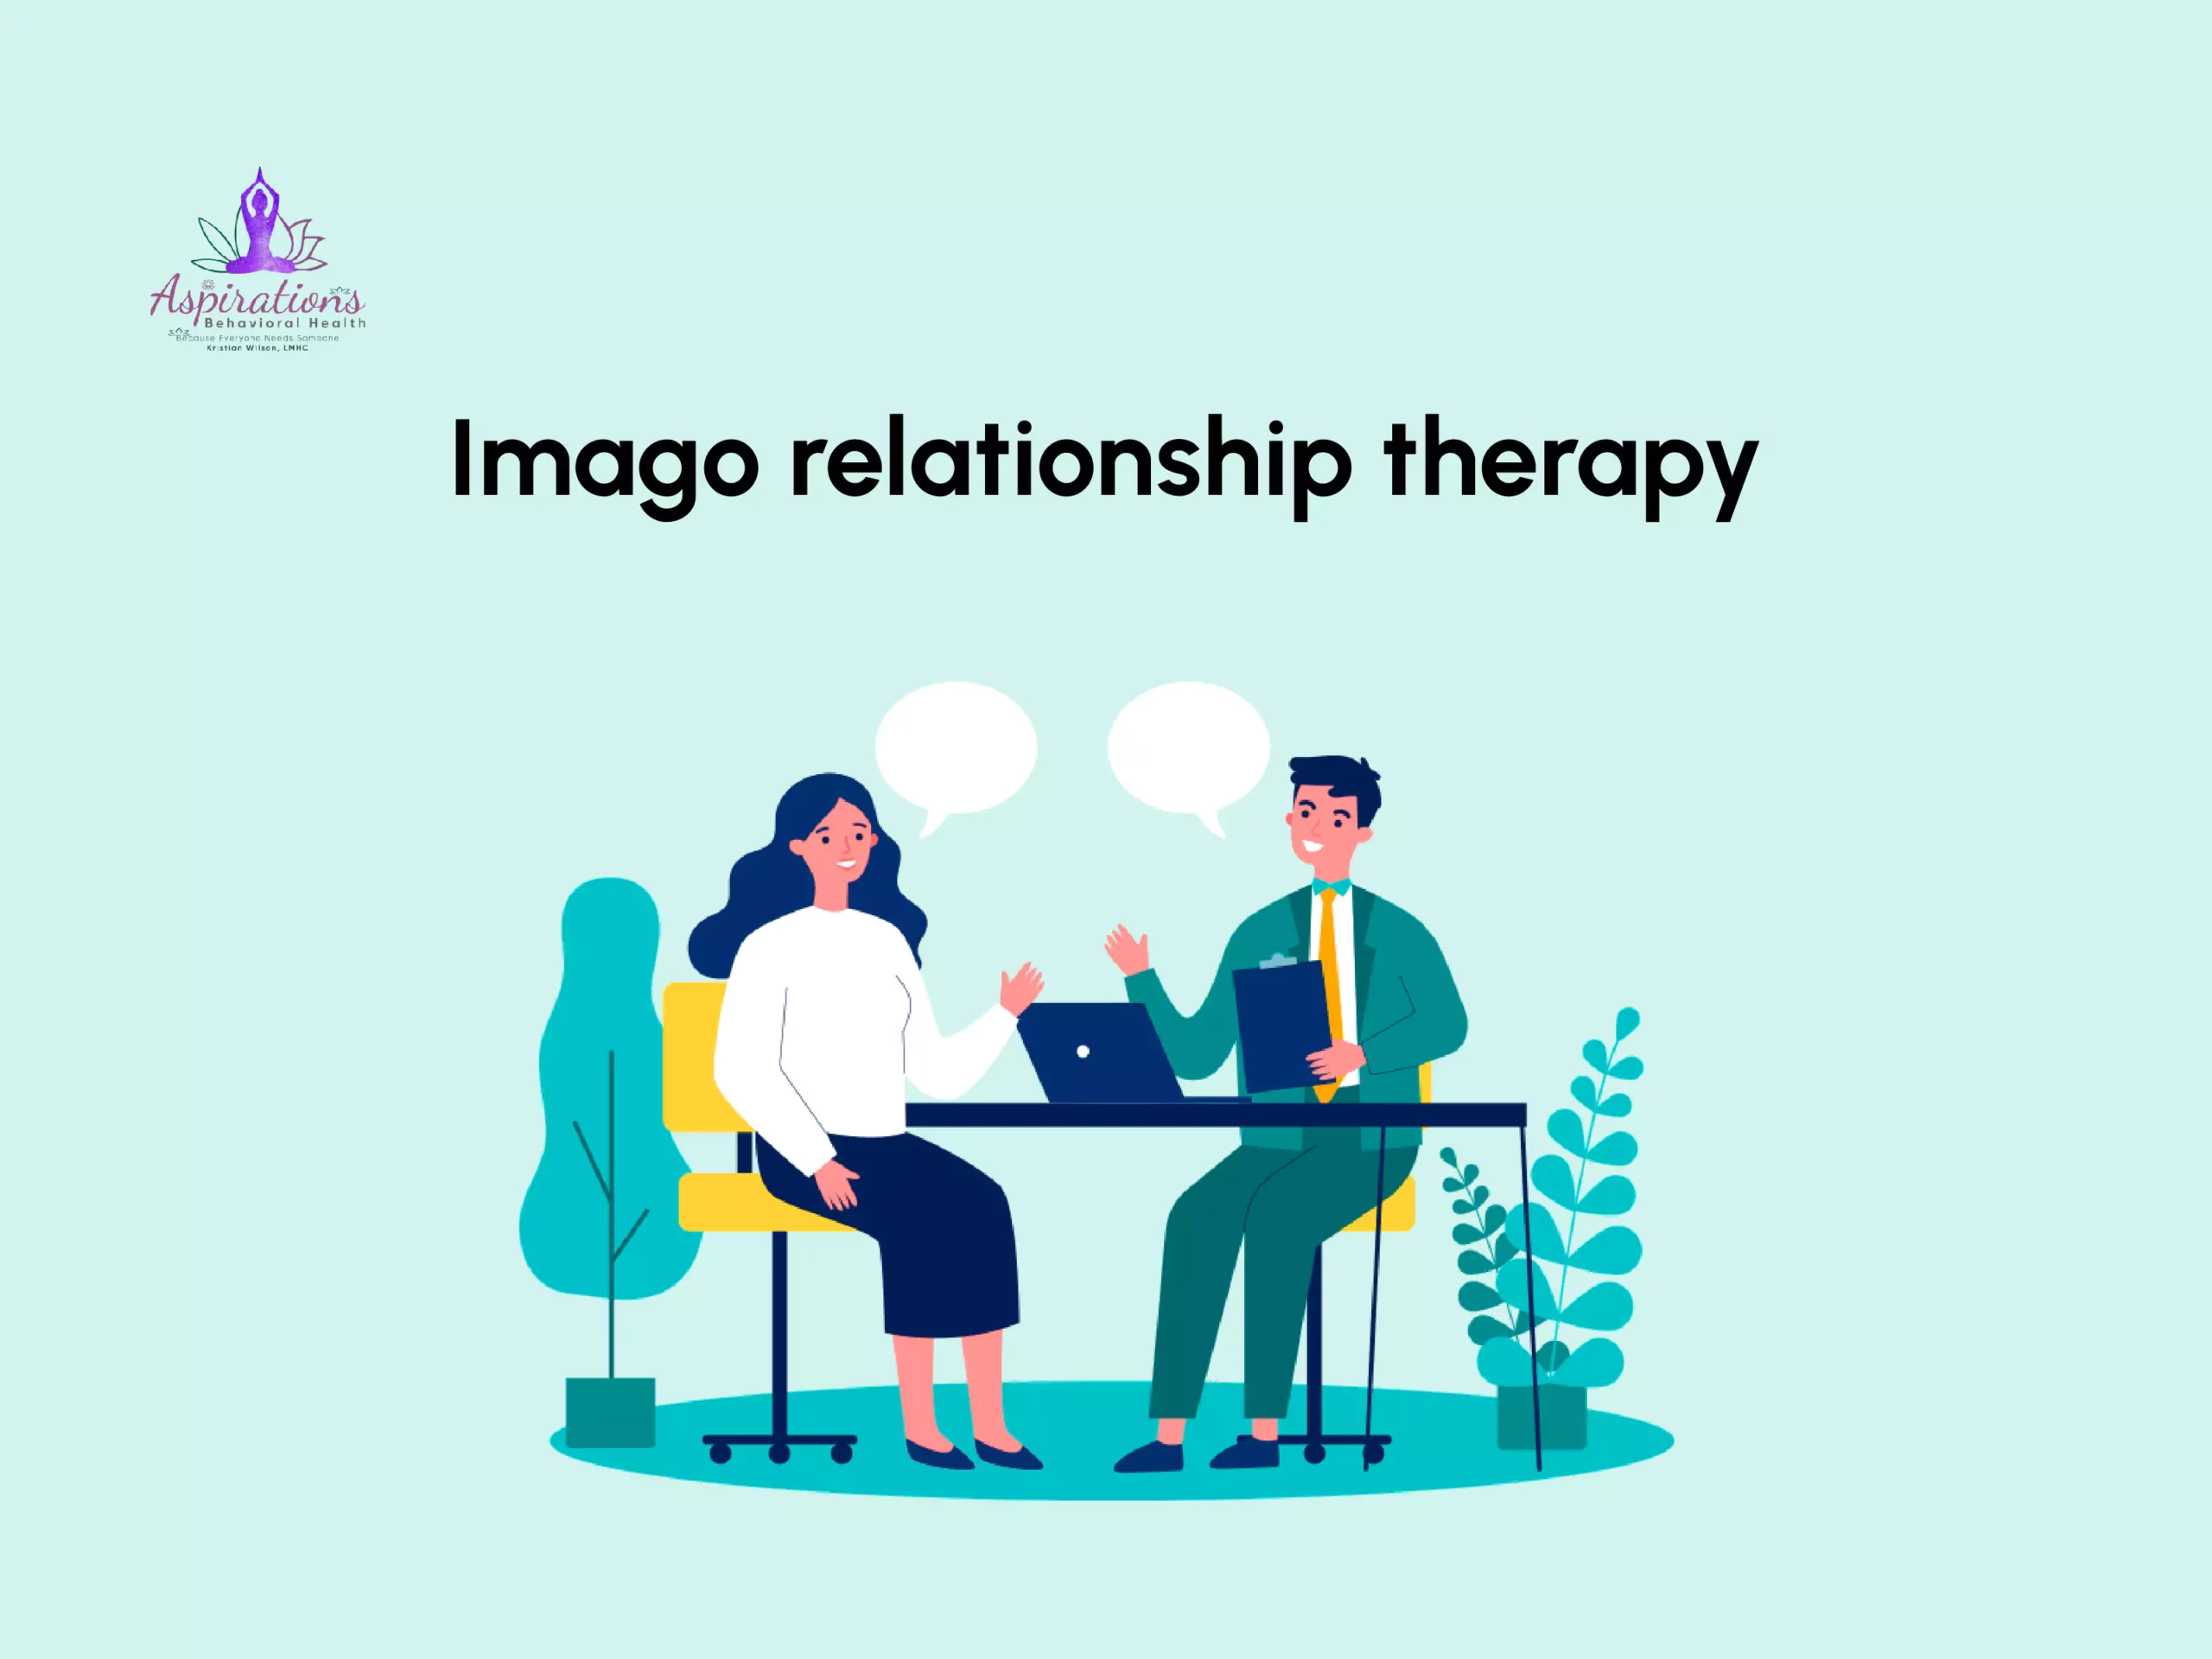 Imago relationship therapy